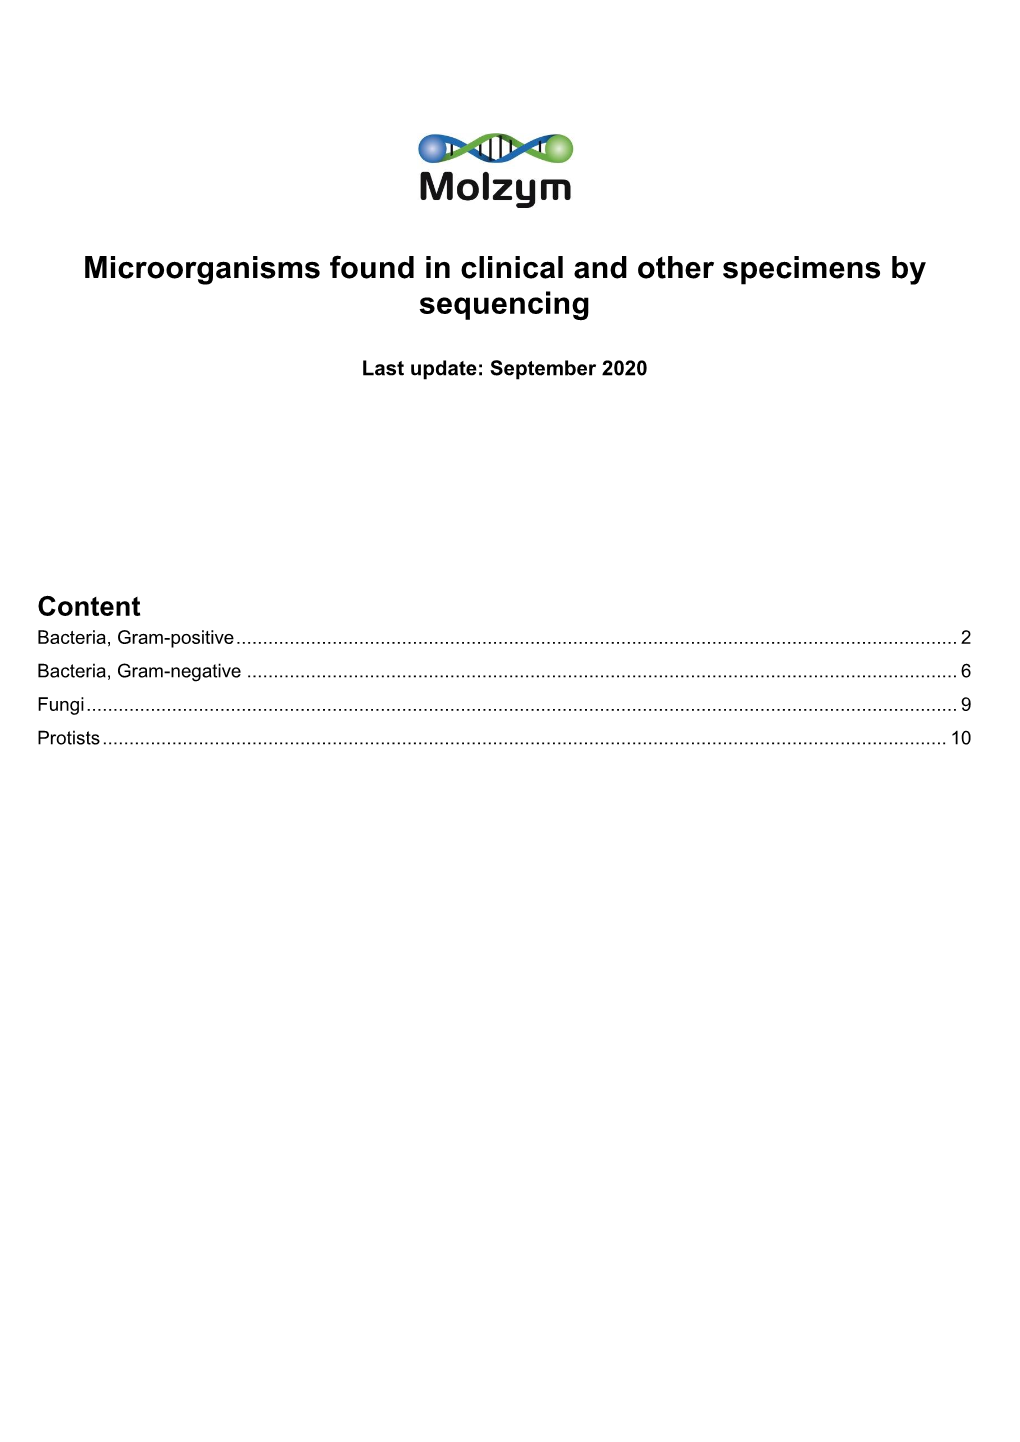 Open List of Microorganisms Found in Clinical and Other Specimens by Sequencing